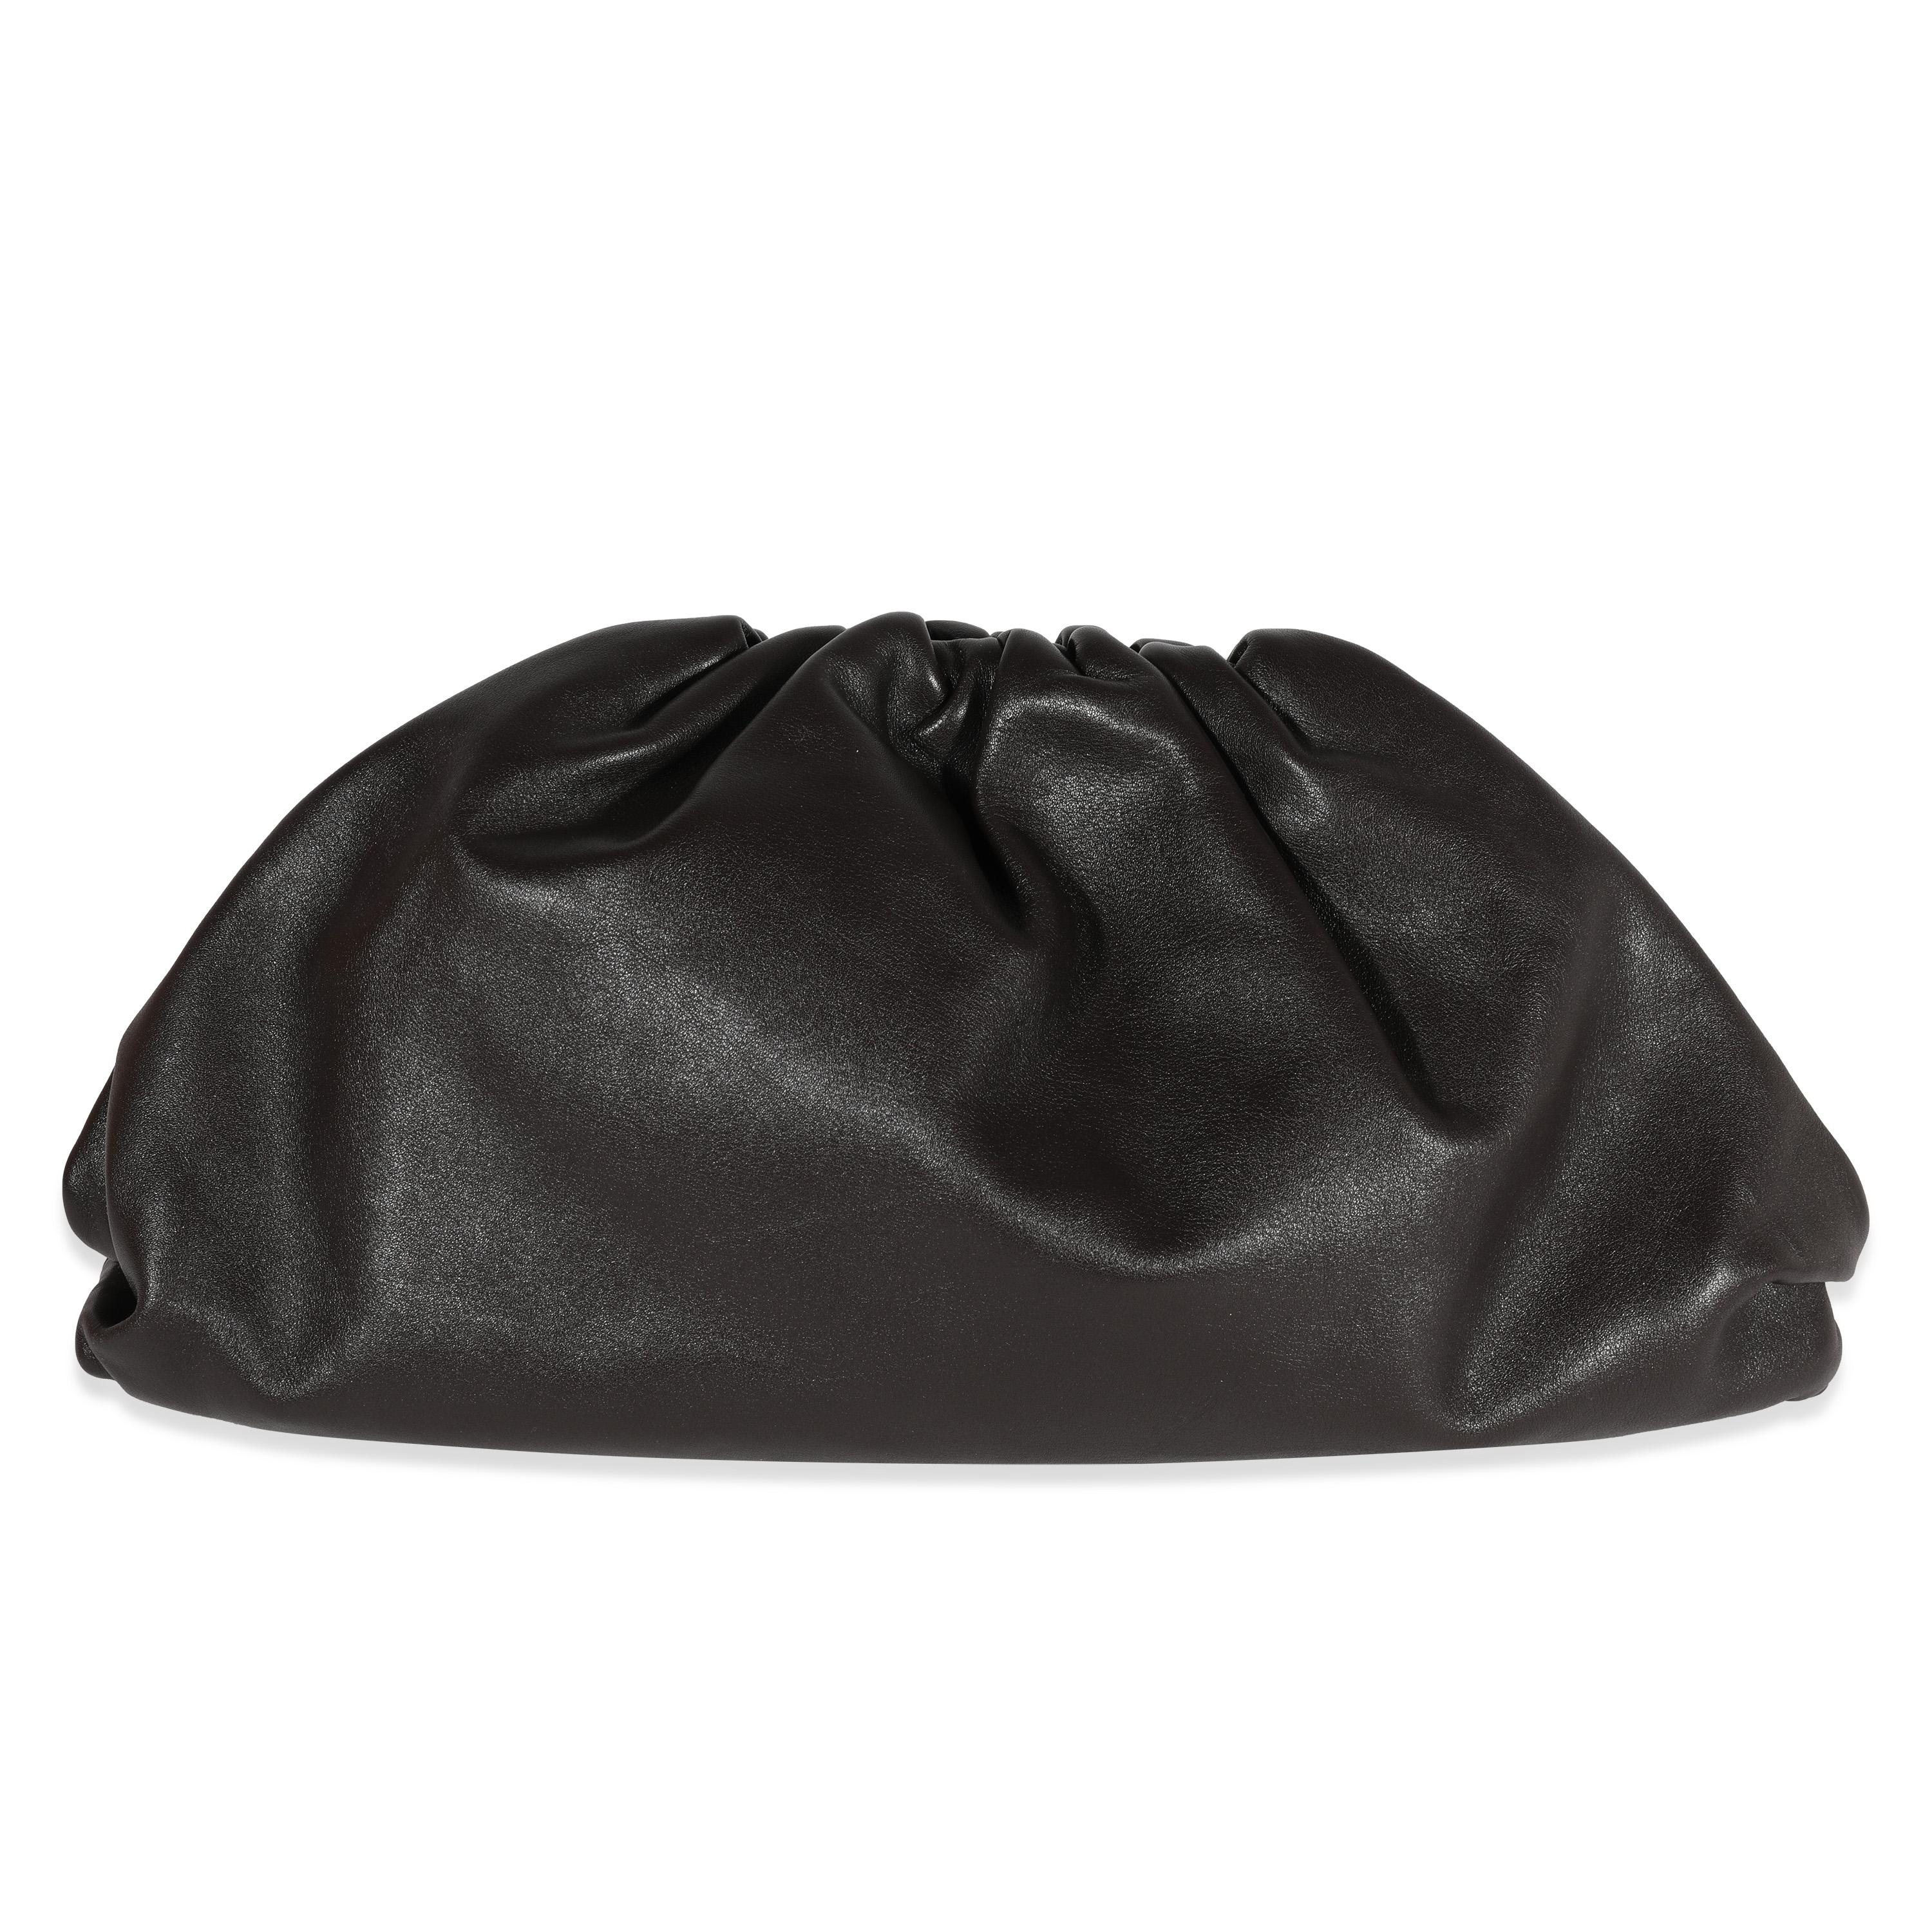 Listing Title: Bottega Veneta Fondant Calfskin Pouch
SKU: 122123
MSRP: 3000.00
Condition: Pre-owned 
Handbag Condition: Very Good
Condition Comments: Very Good Condition. Fragrance to interior. Creasing to leather. Light scuffing to interior